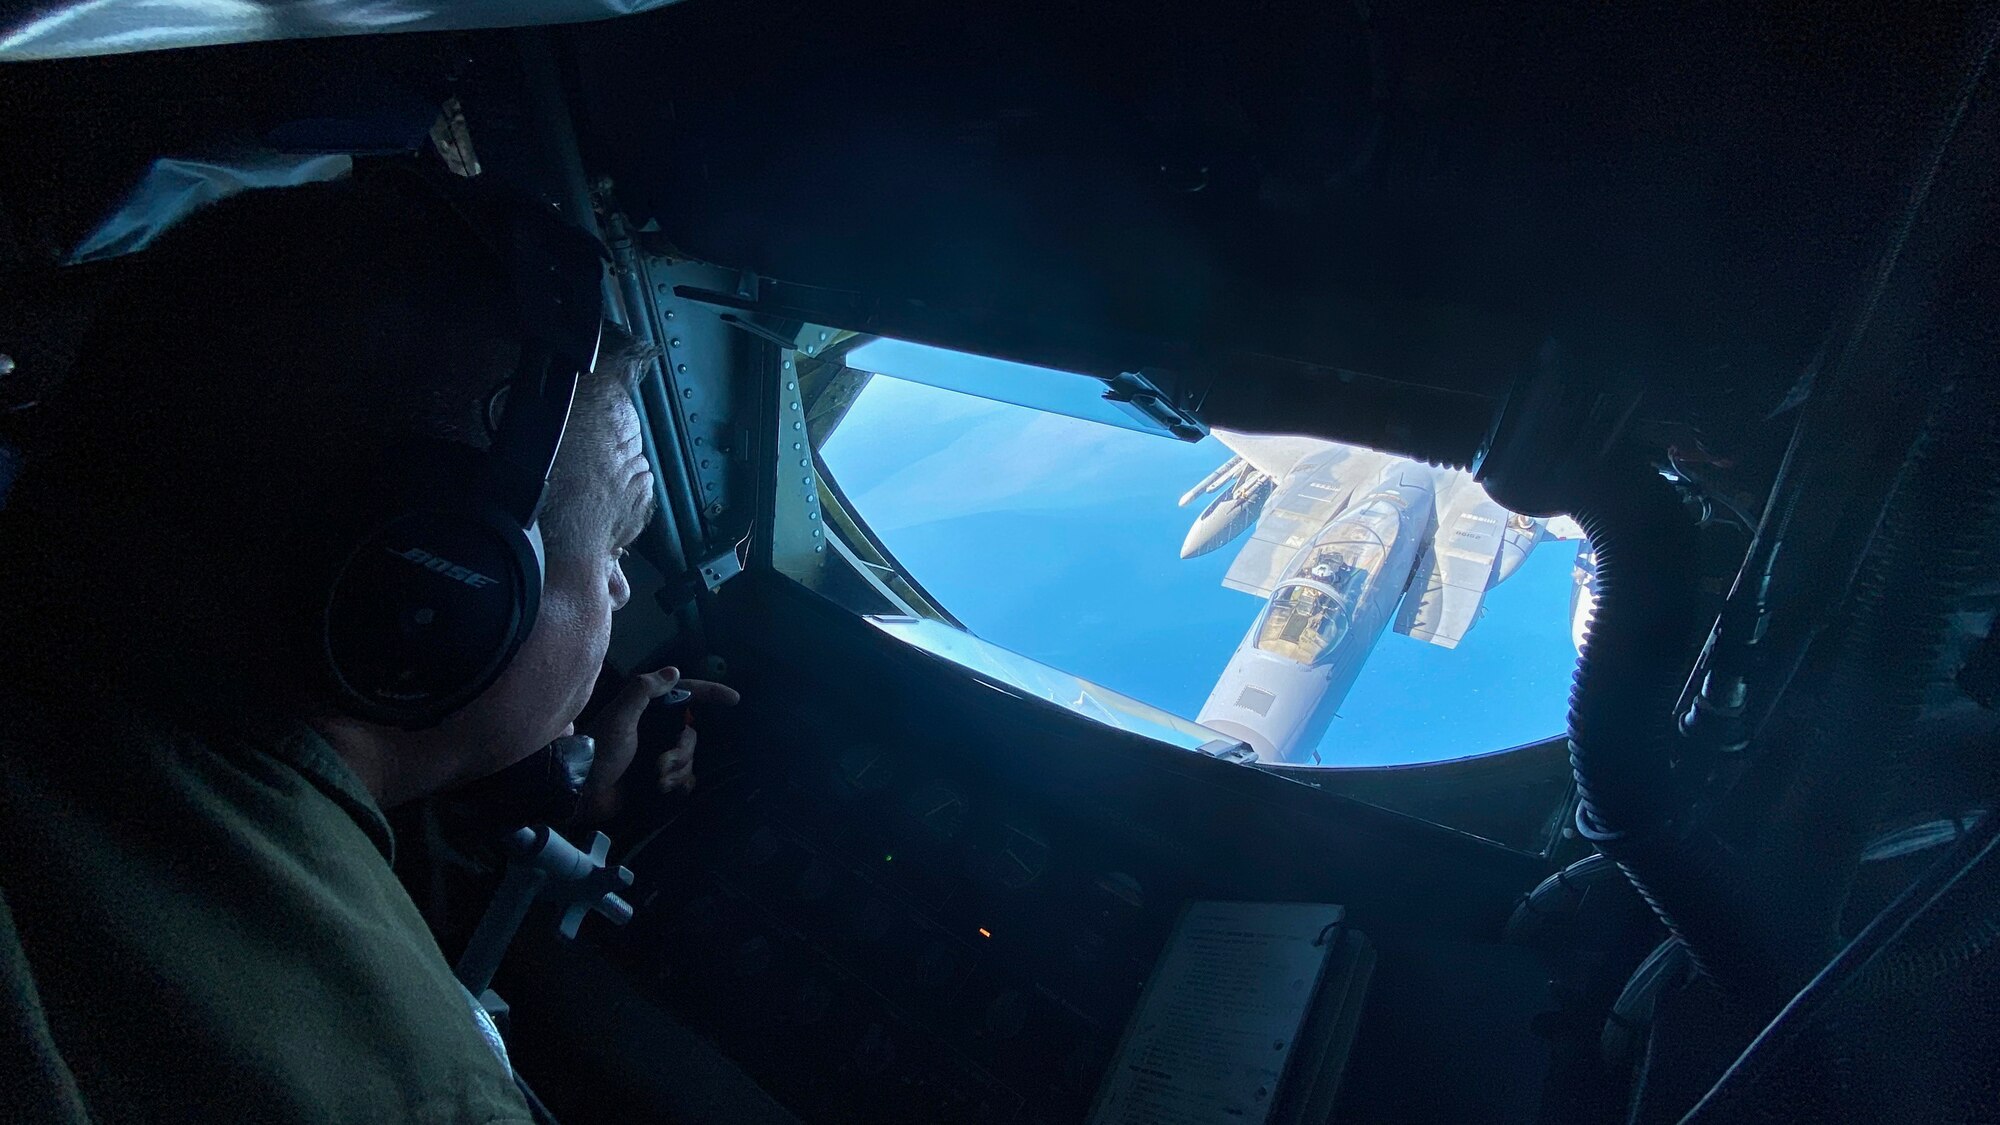 U.S. Air Force Tech. Sgt. Jordan Jungwirth IV, a KC-135 Stratotanker boom operator assigned to the 128th Air Refueling Wing at General Mitchell Air National Guard Base, Wisconsin, controlled the boom during an air refueling mission over the Gulf of Mexico. The KC-135 Stratotanker can hold about 200,000 pounds of fuel.